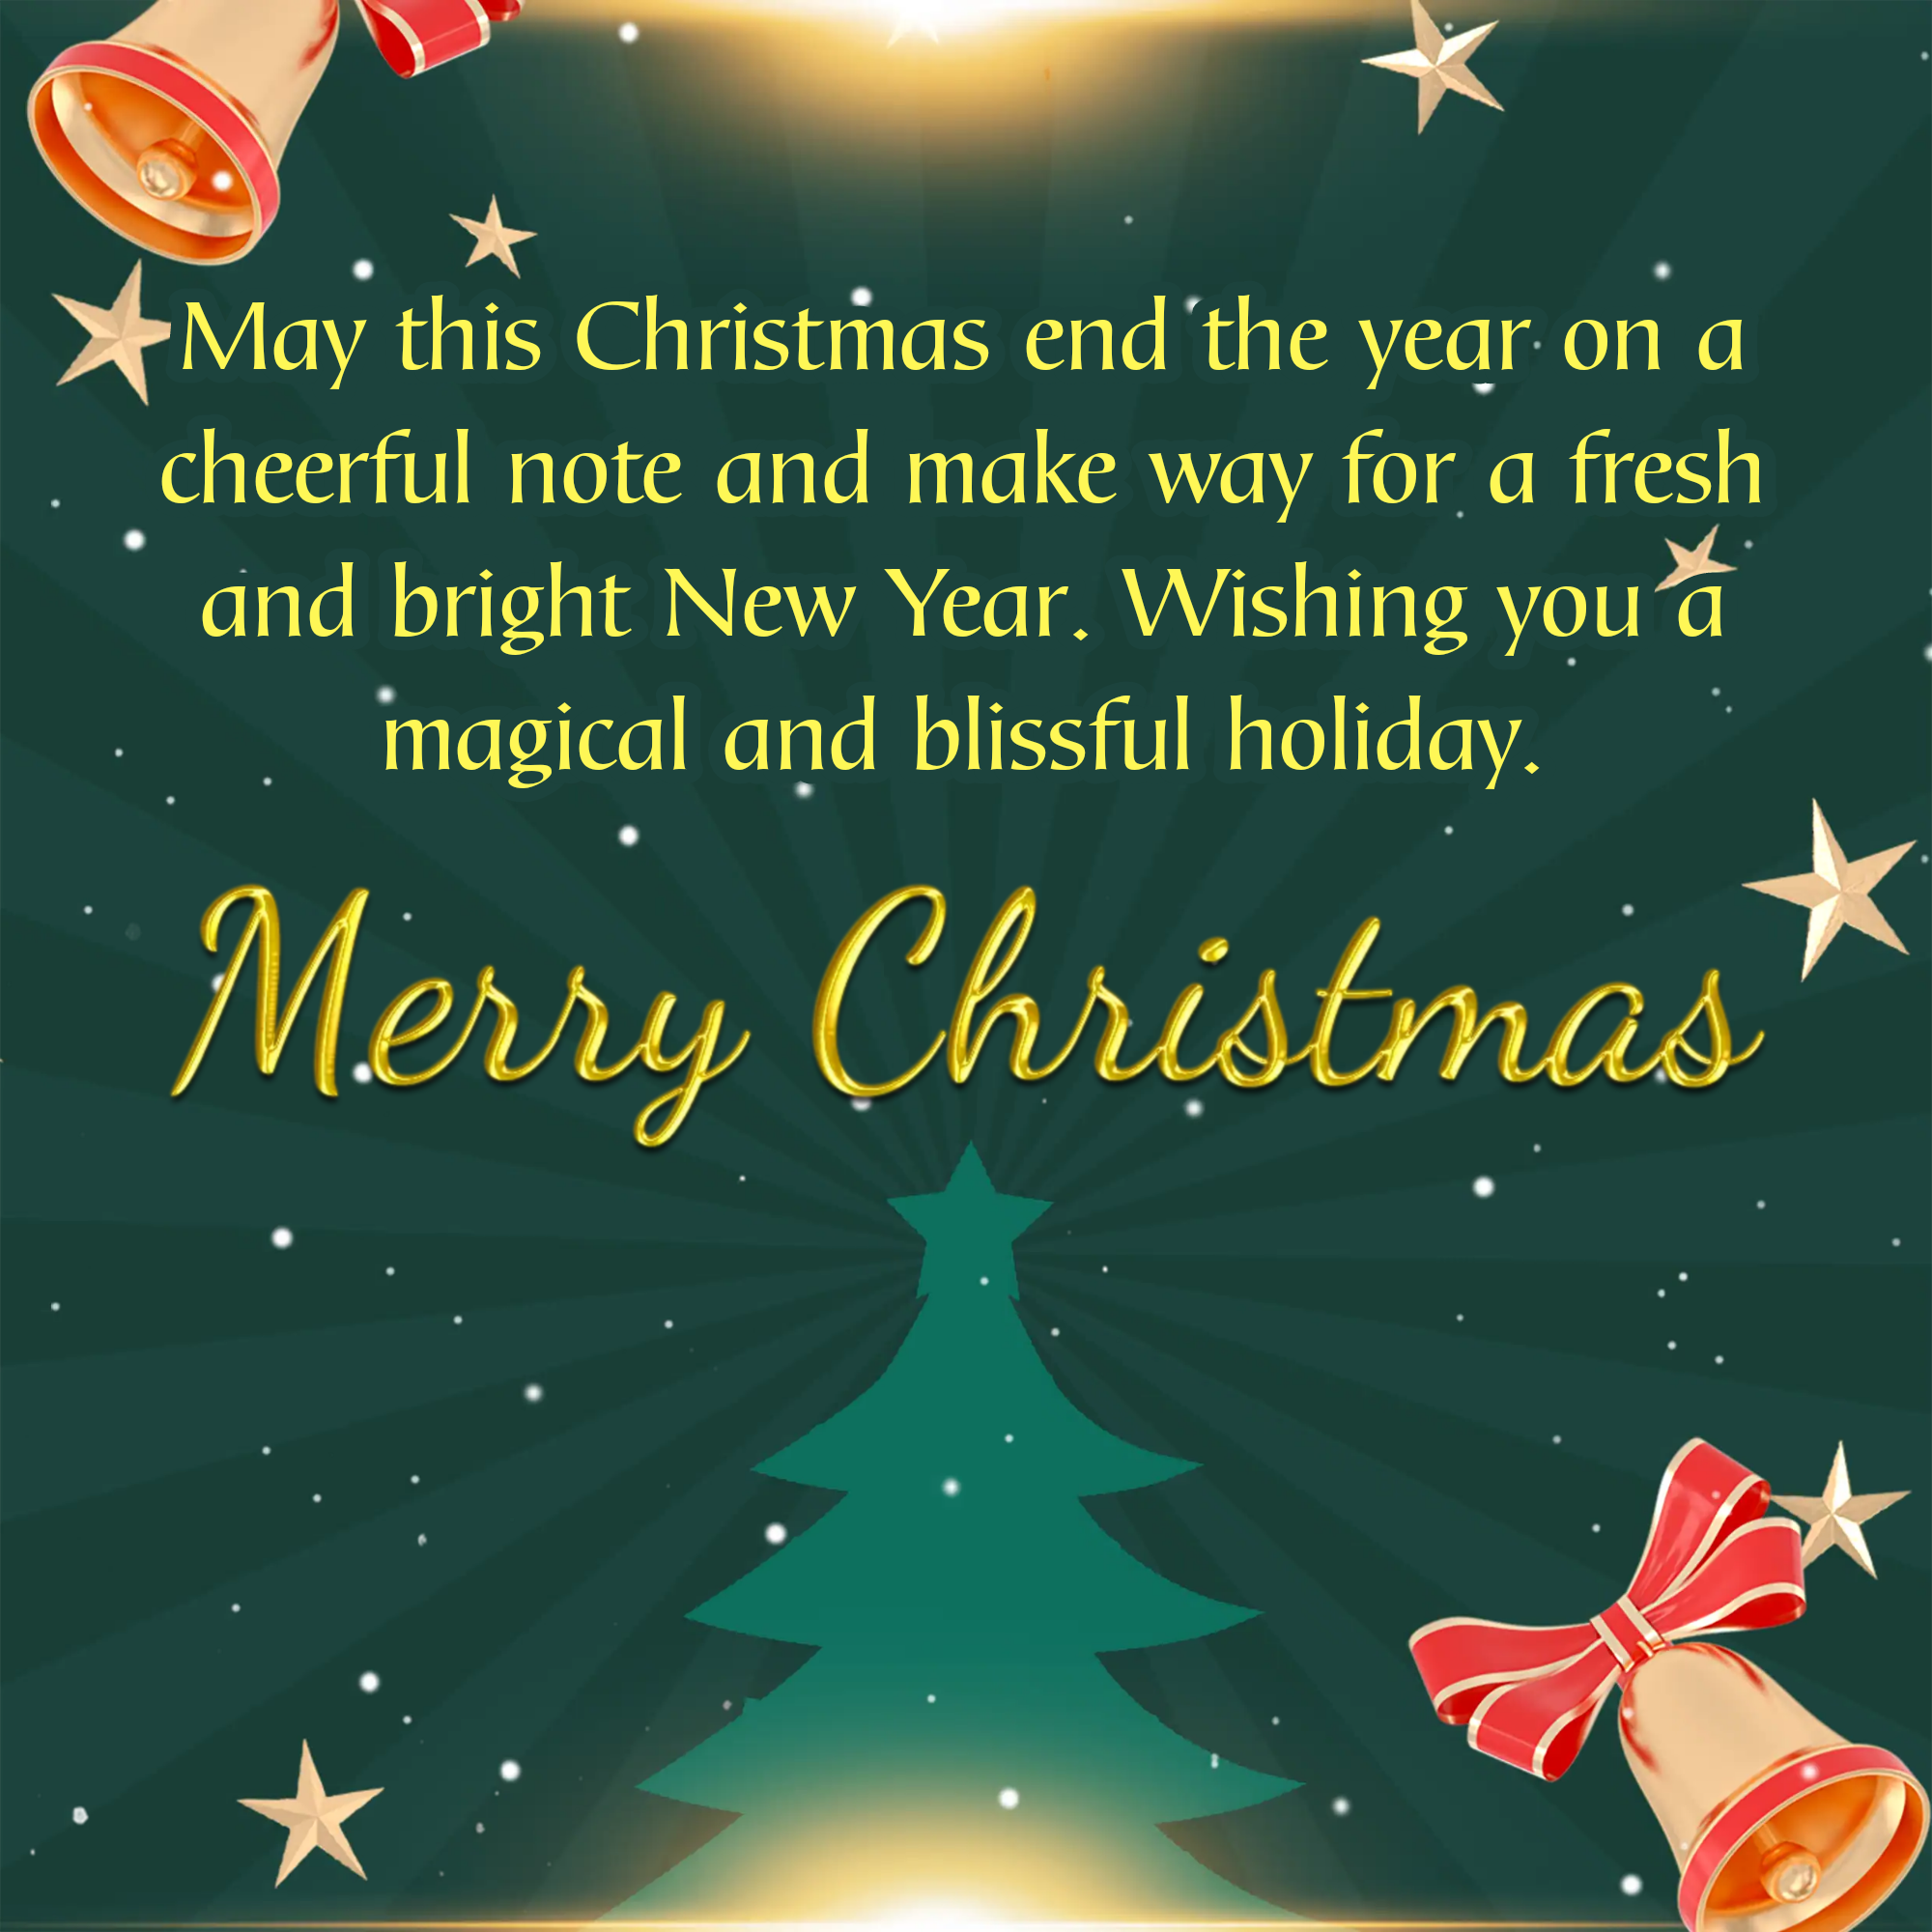 May this Christmas end the year on a cheerful note